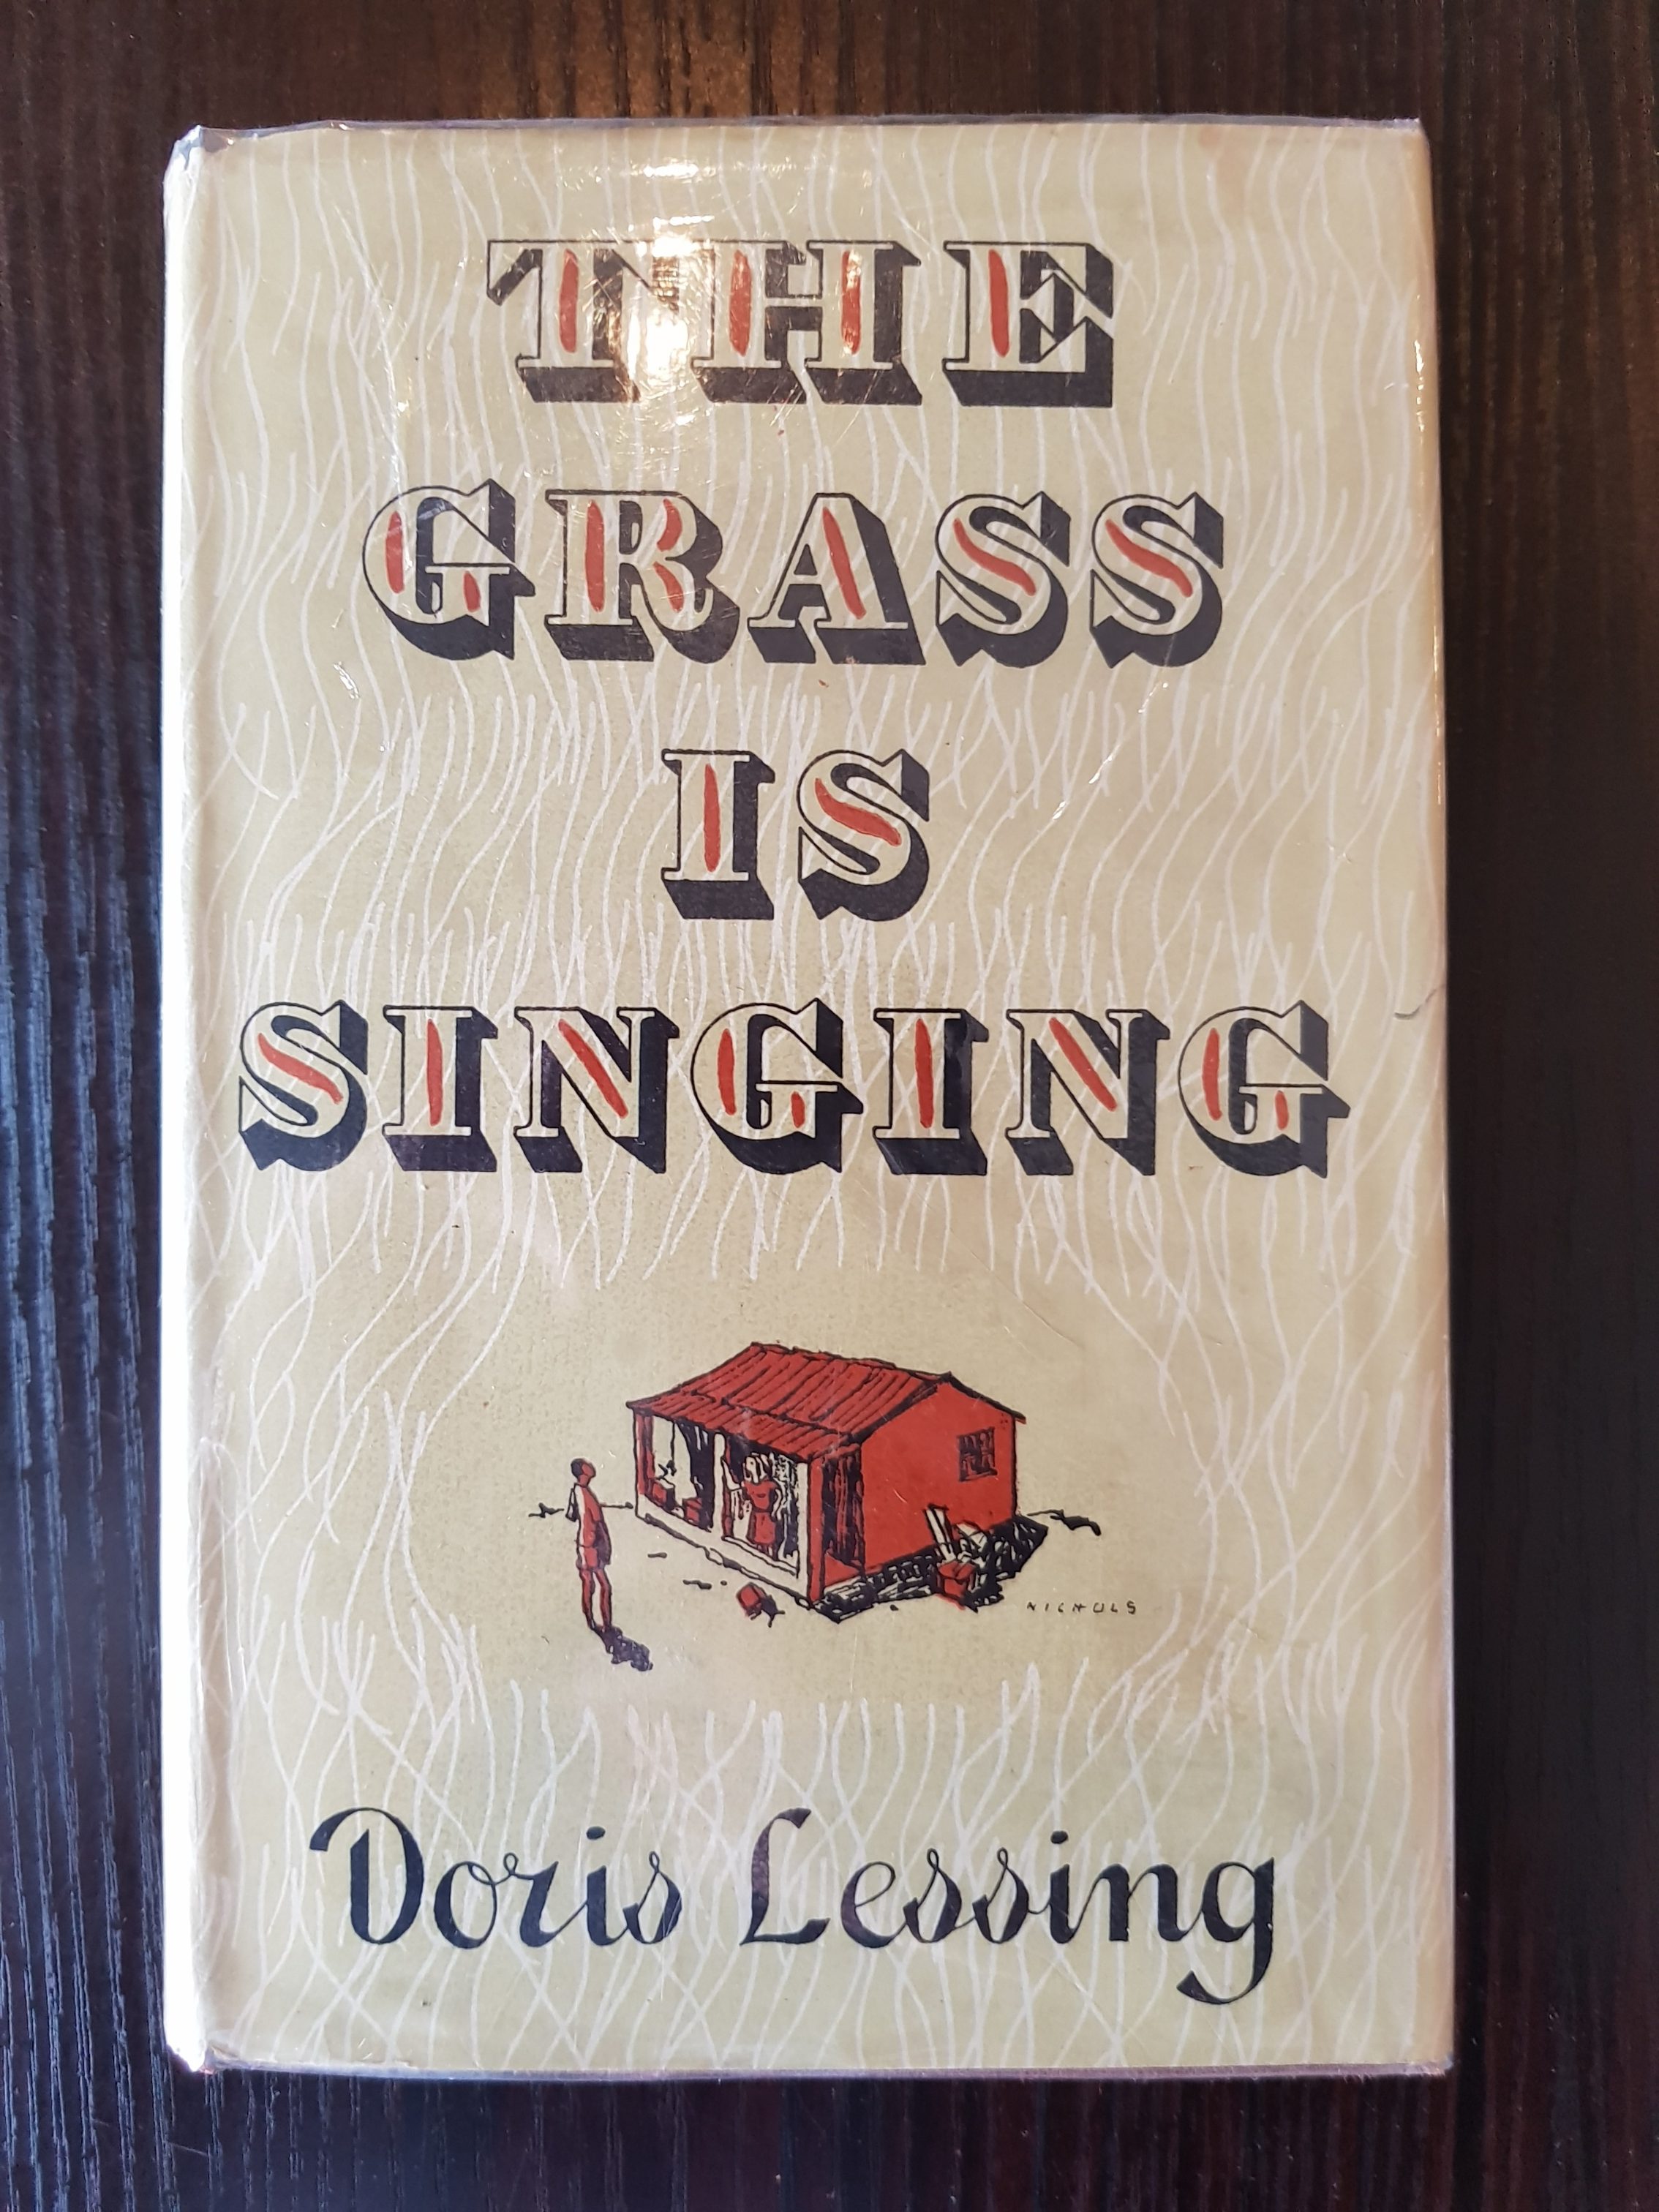 artists in doris lessing the grass is singing